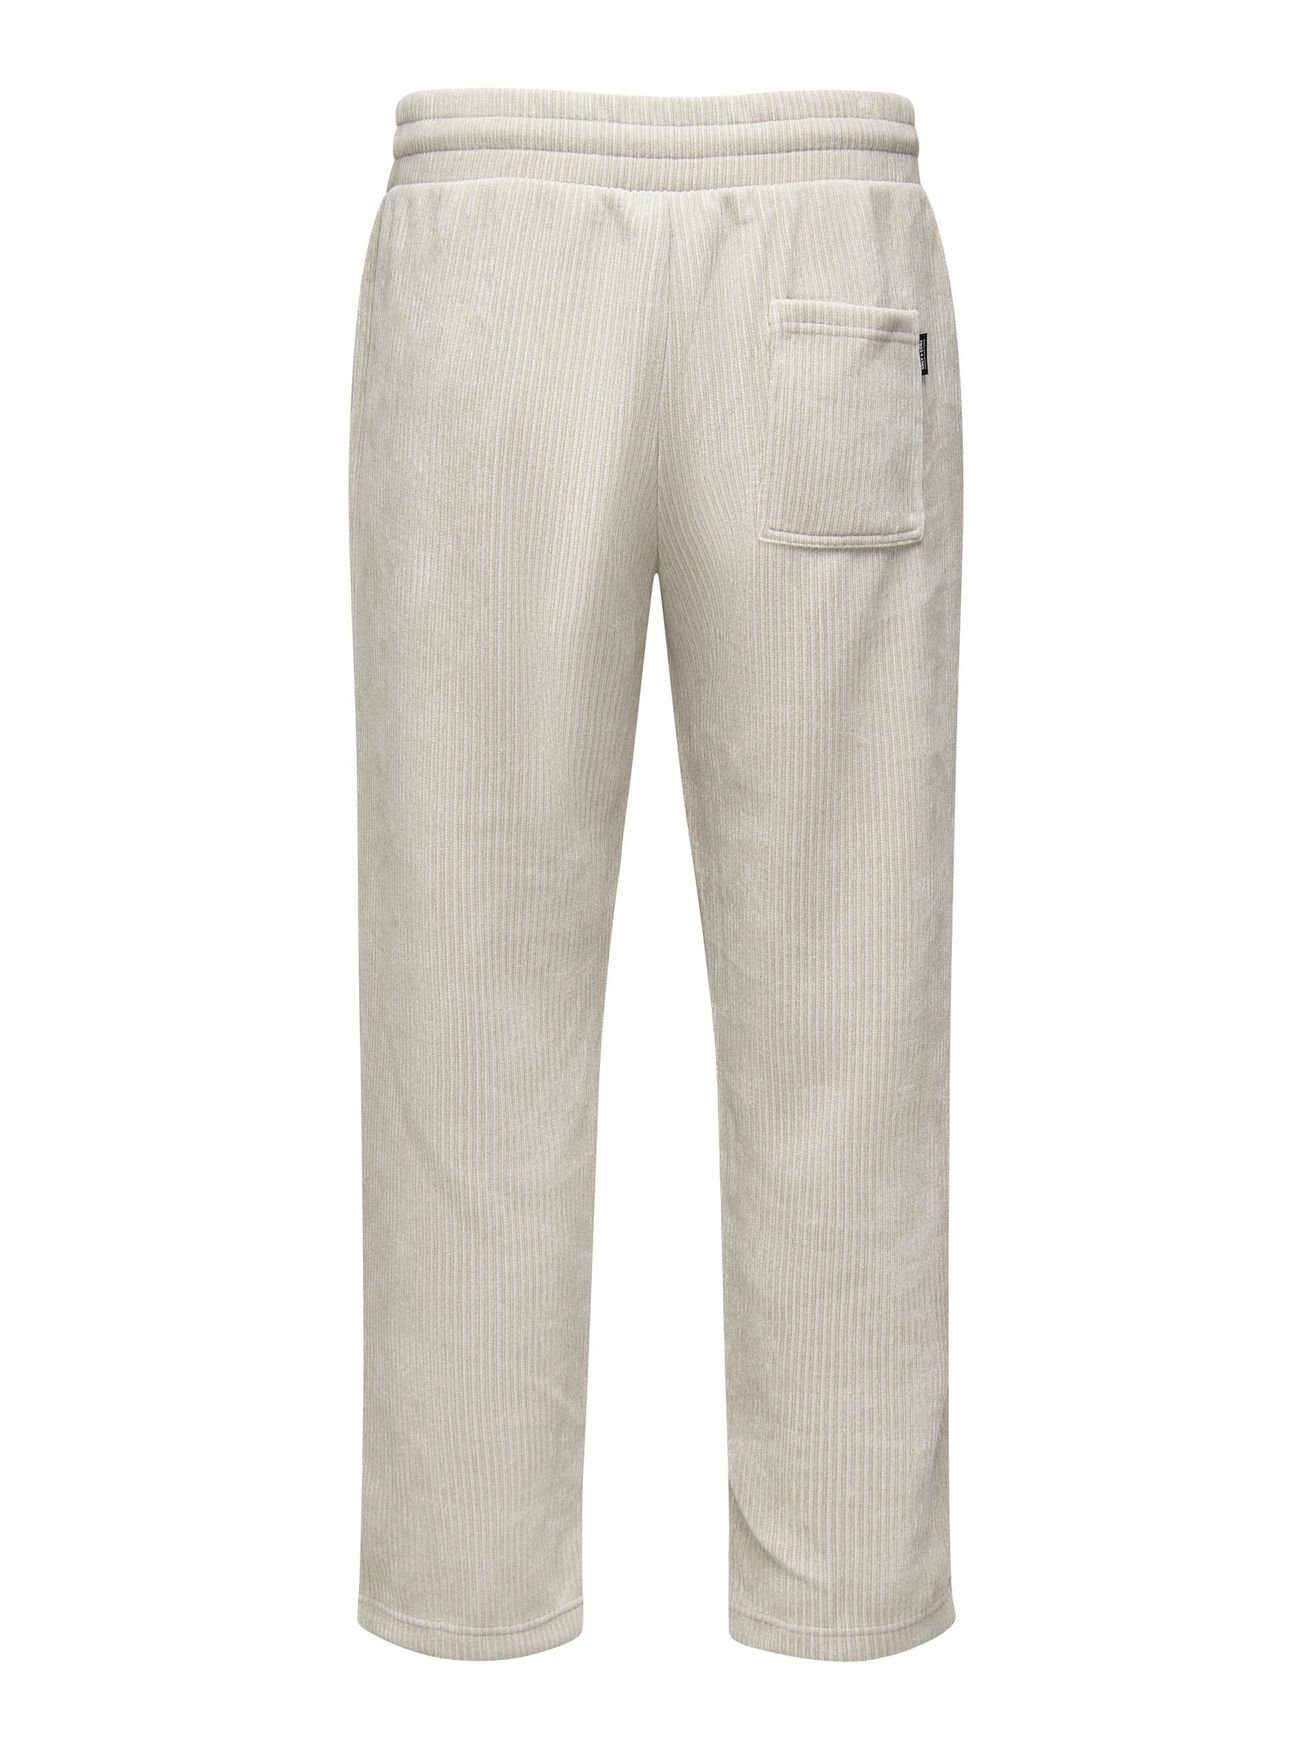 ONLY & SONS Stoffhose ONSACE Wide Hose 7/8 5045 Beige in Relaxed Leg Jogginghose Cord